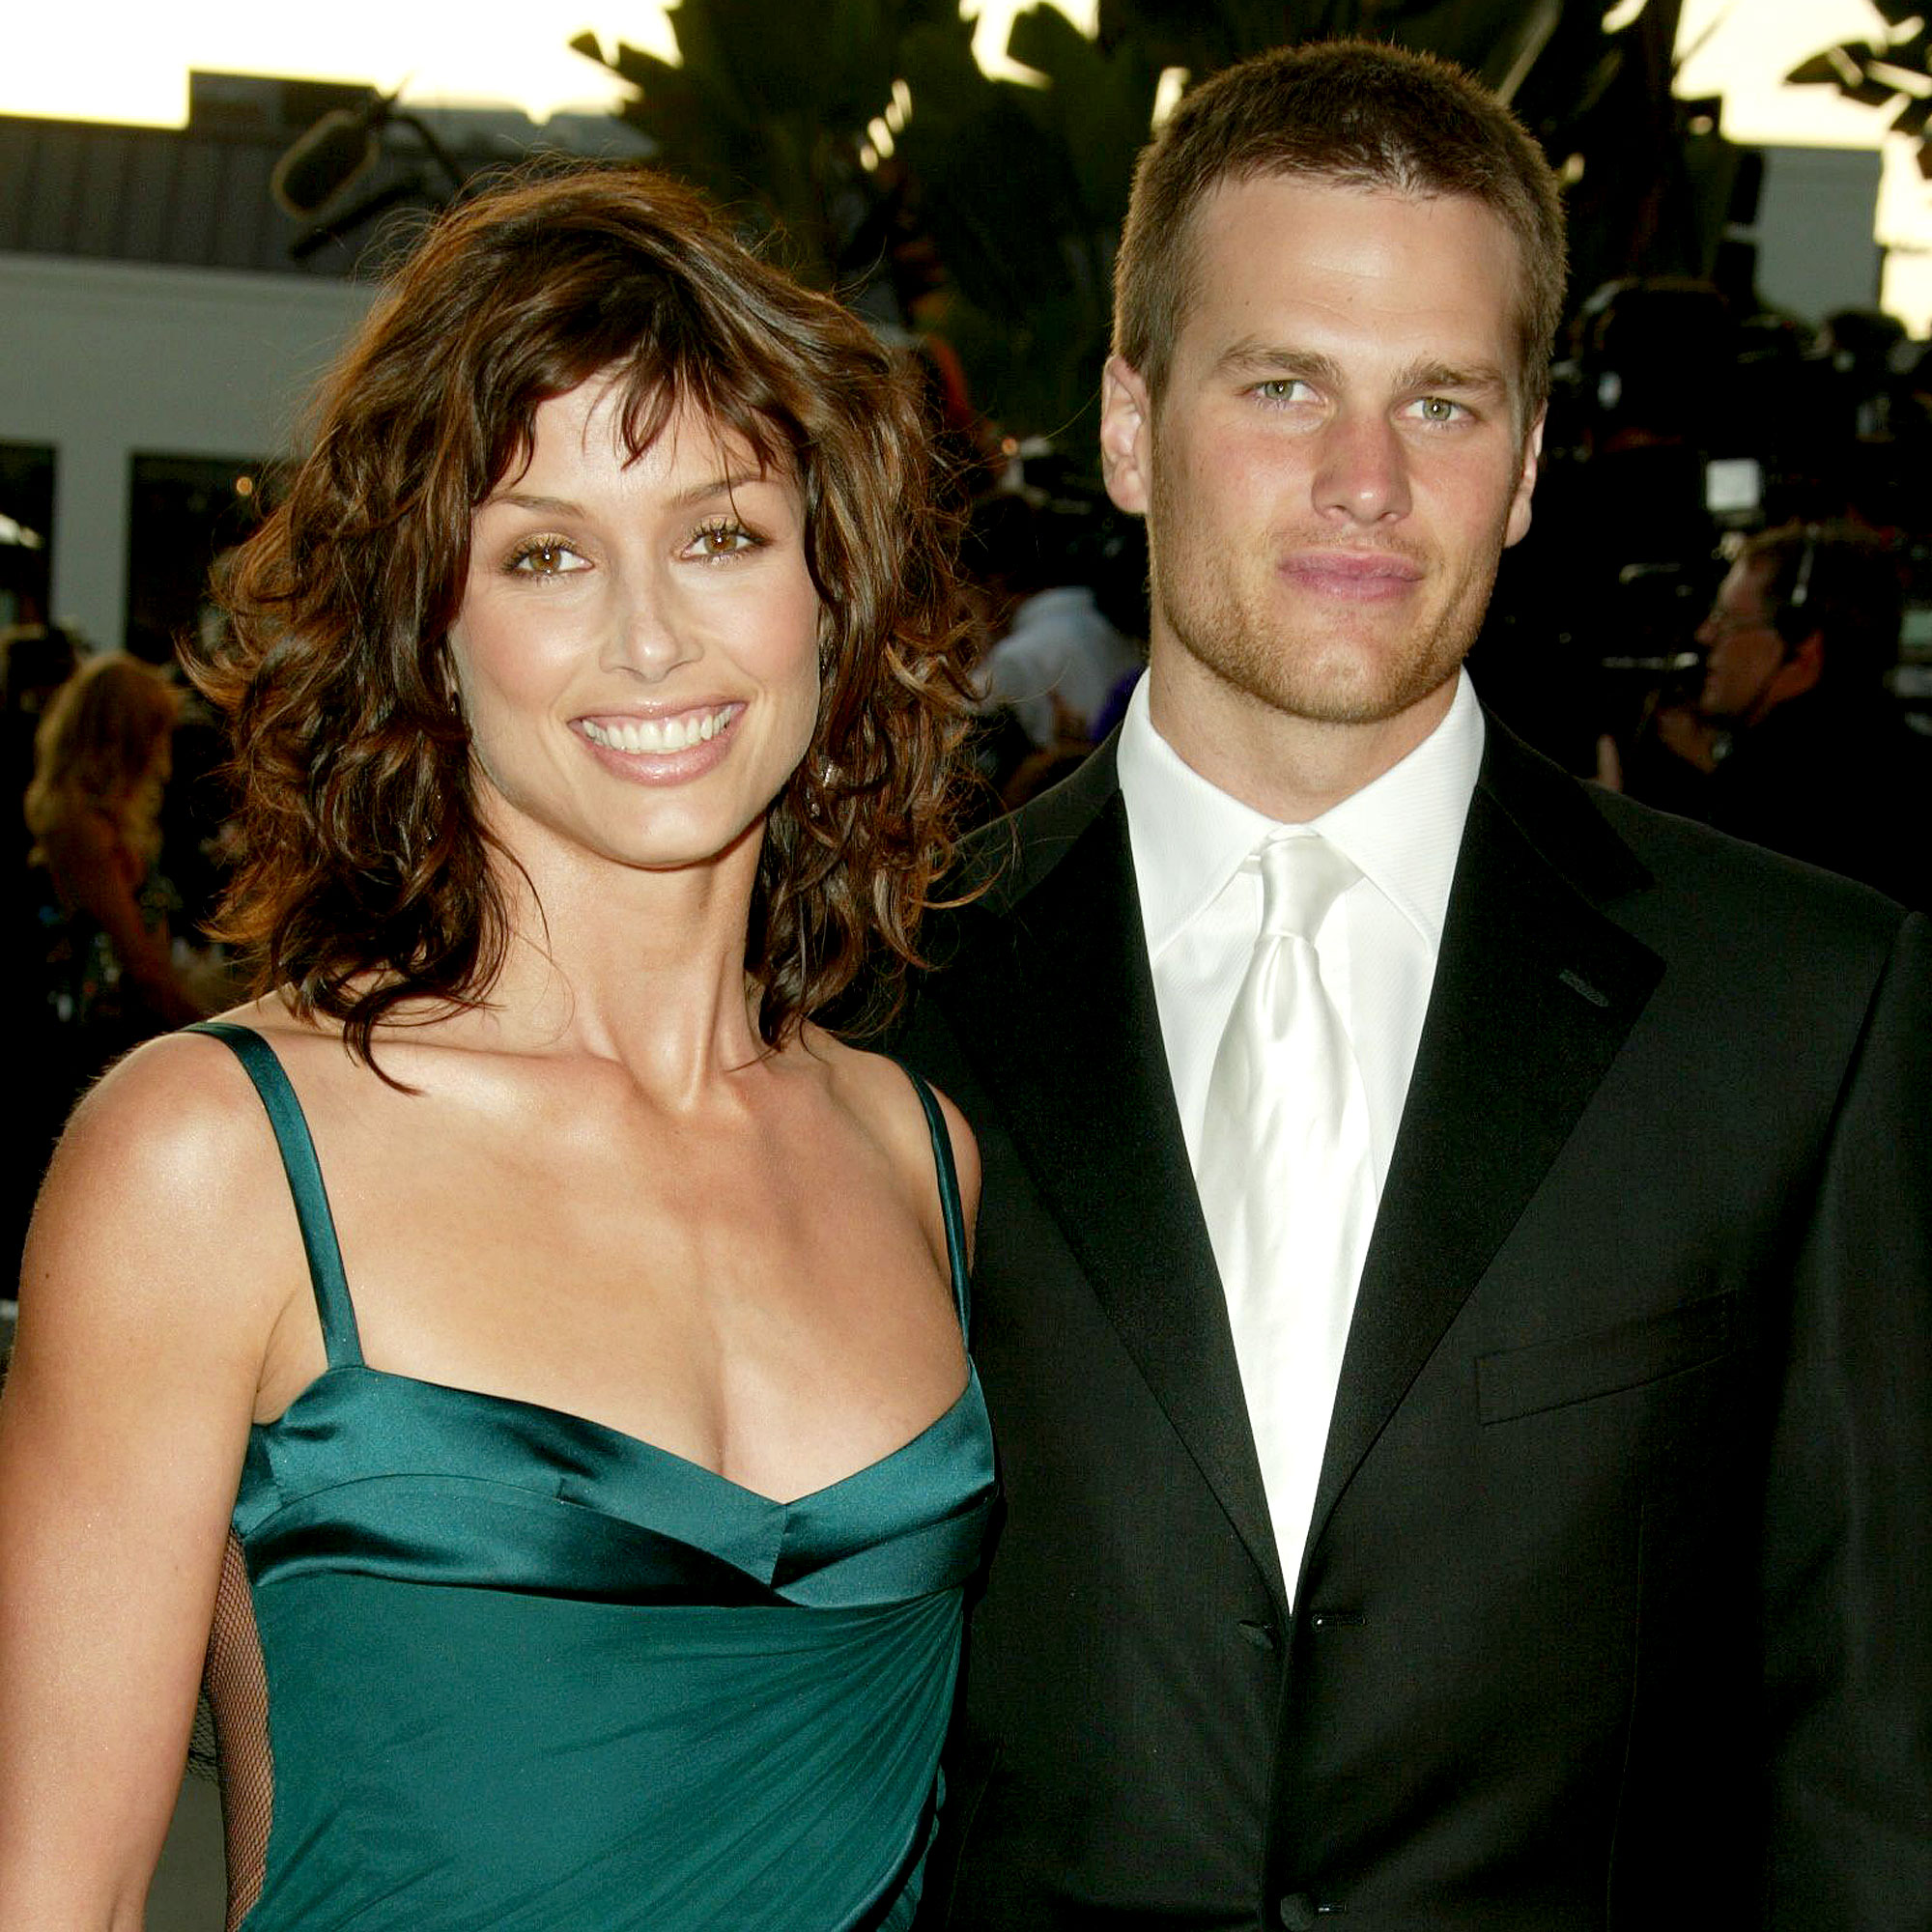 Bridget Moynahans Quotes About Her Relationship With Ex Tom Brady Us Weekly 4704